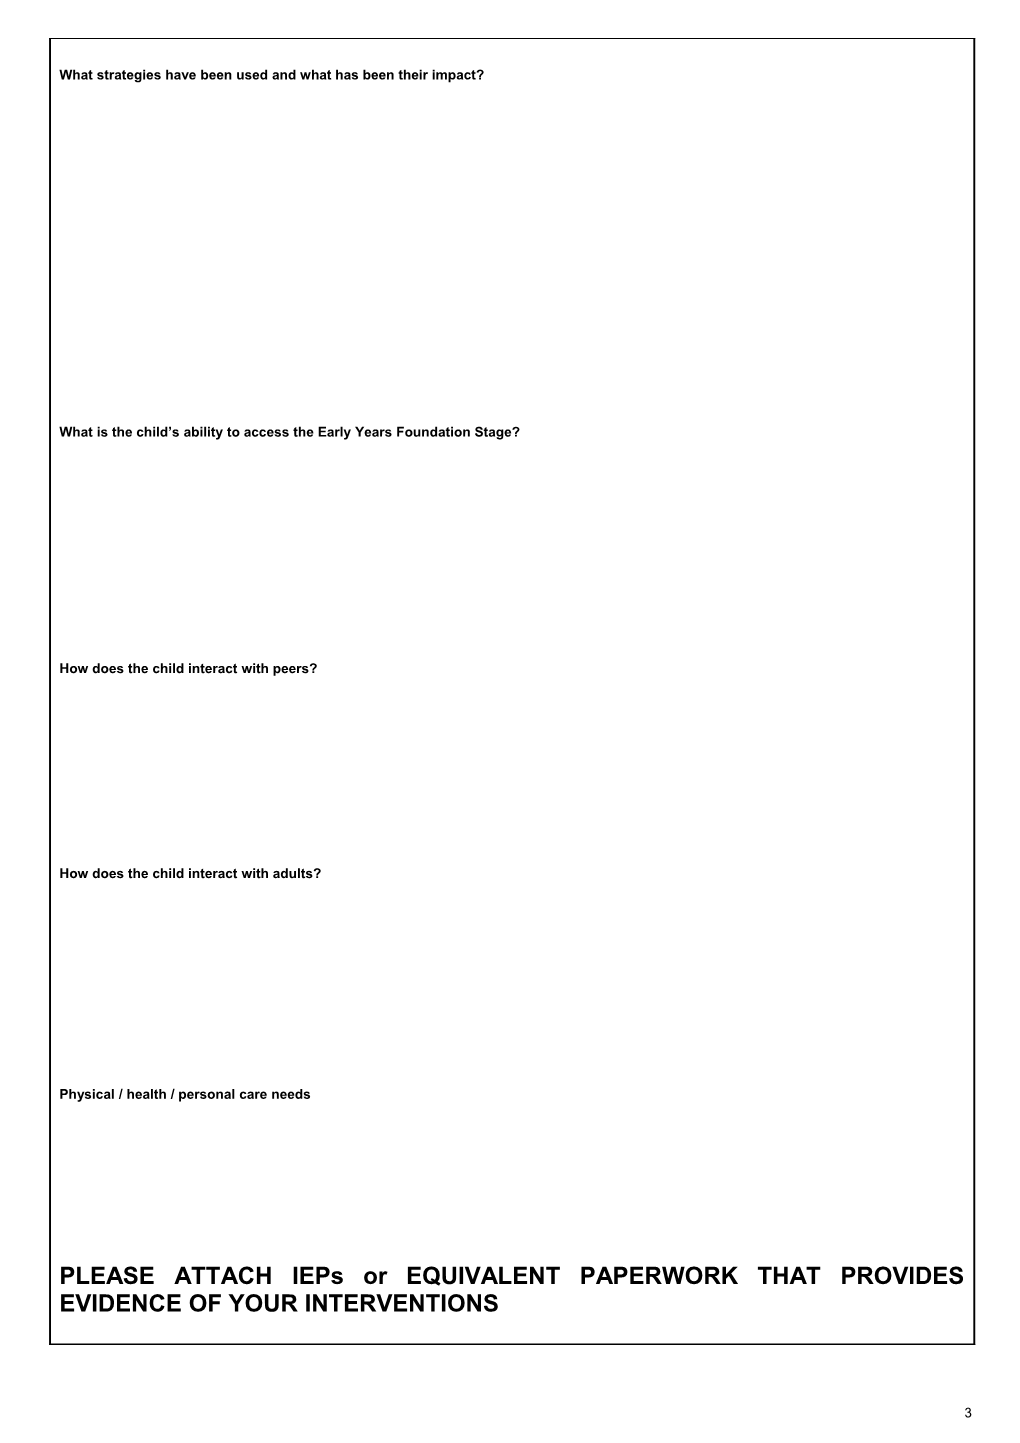 Circular 108-10 Bromley Early Support Pre-School Panel Referral Form